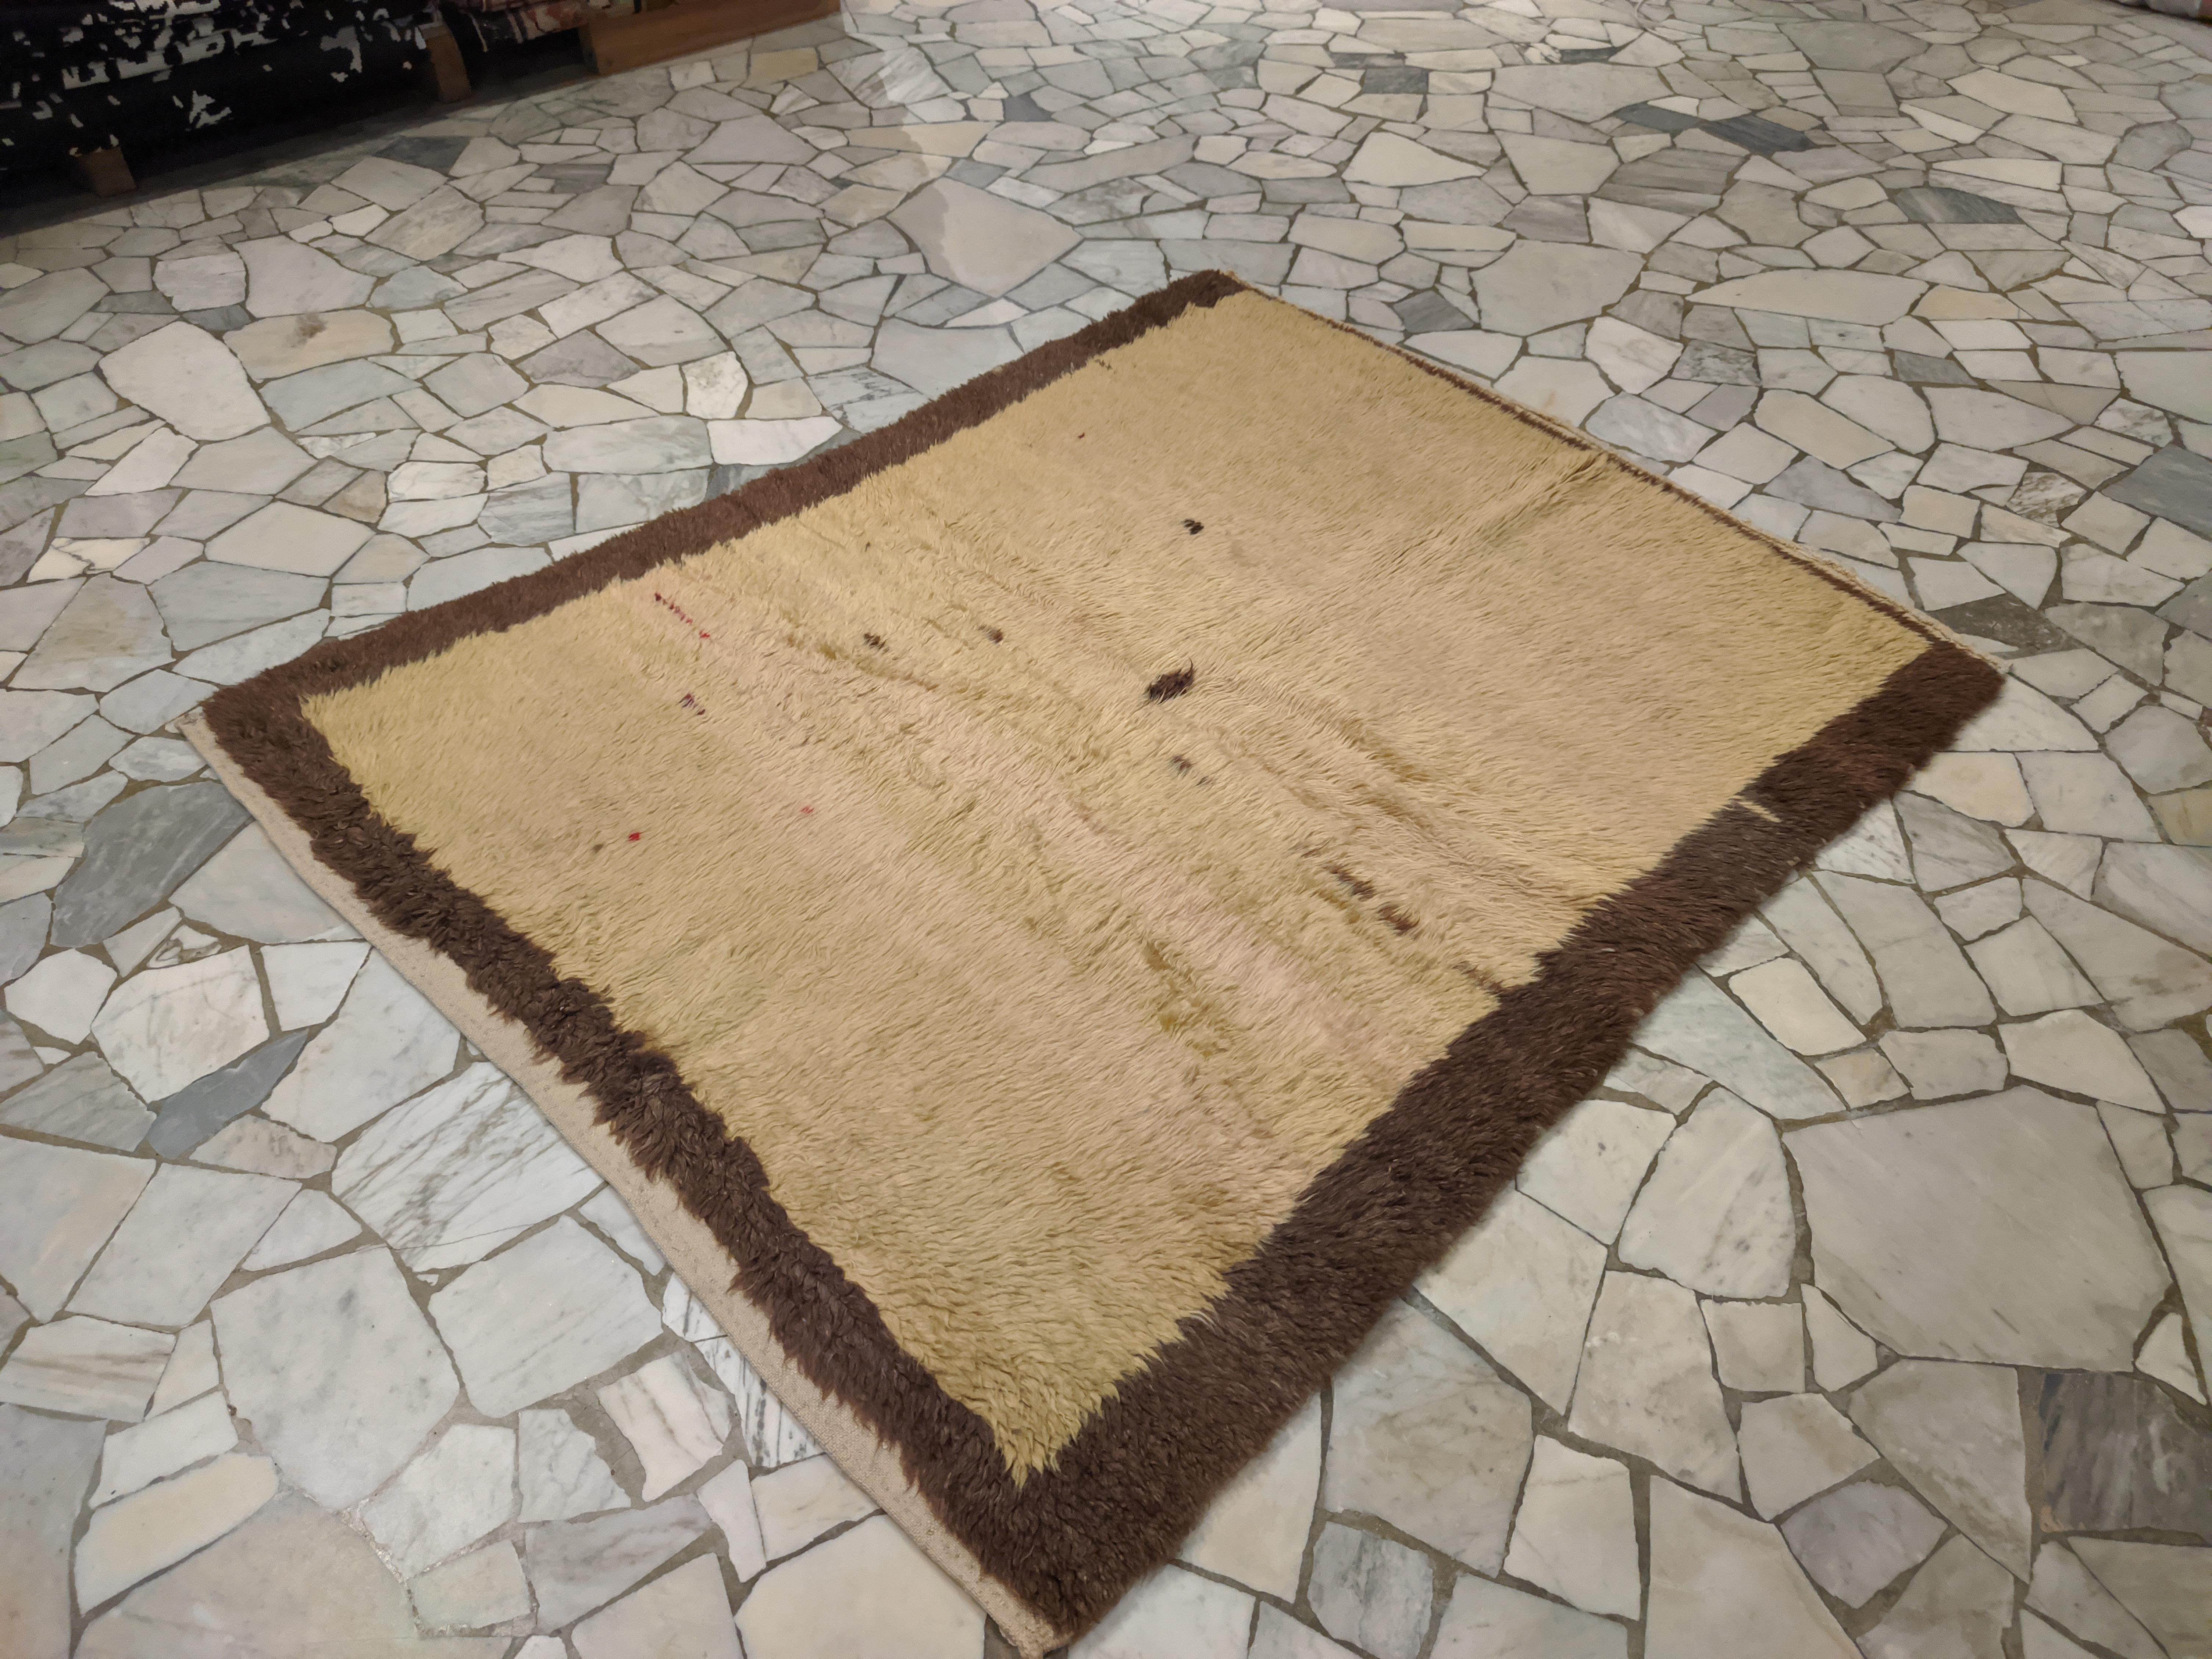 Distinguished by a squarish format typical of yatak (bedding) rugs, this Tulu has a soft creamy yellow background randomly punctuated by small dots and by a larger one indicating the center. Rugs of this type were used by the nomads of central